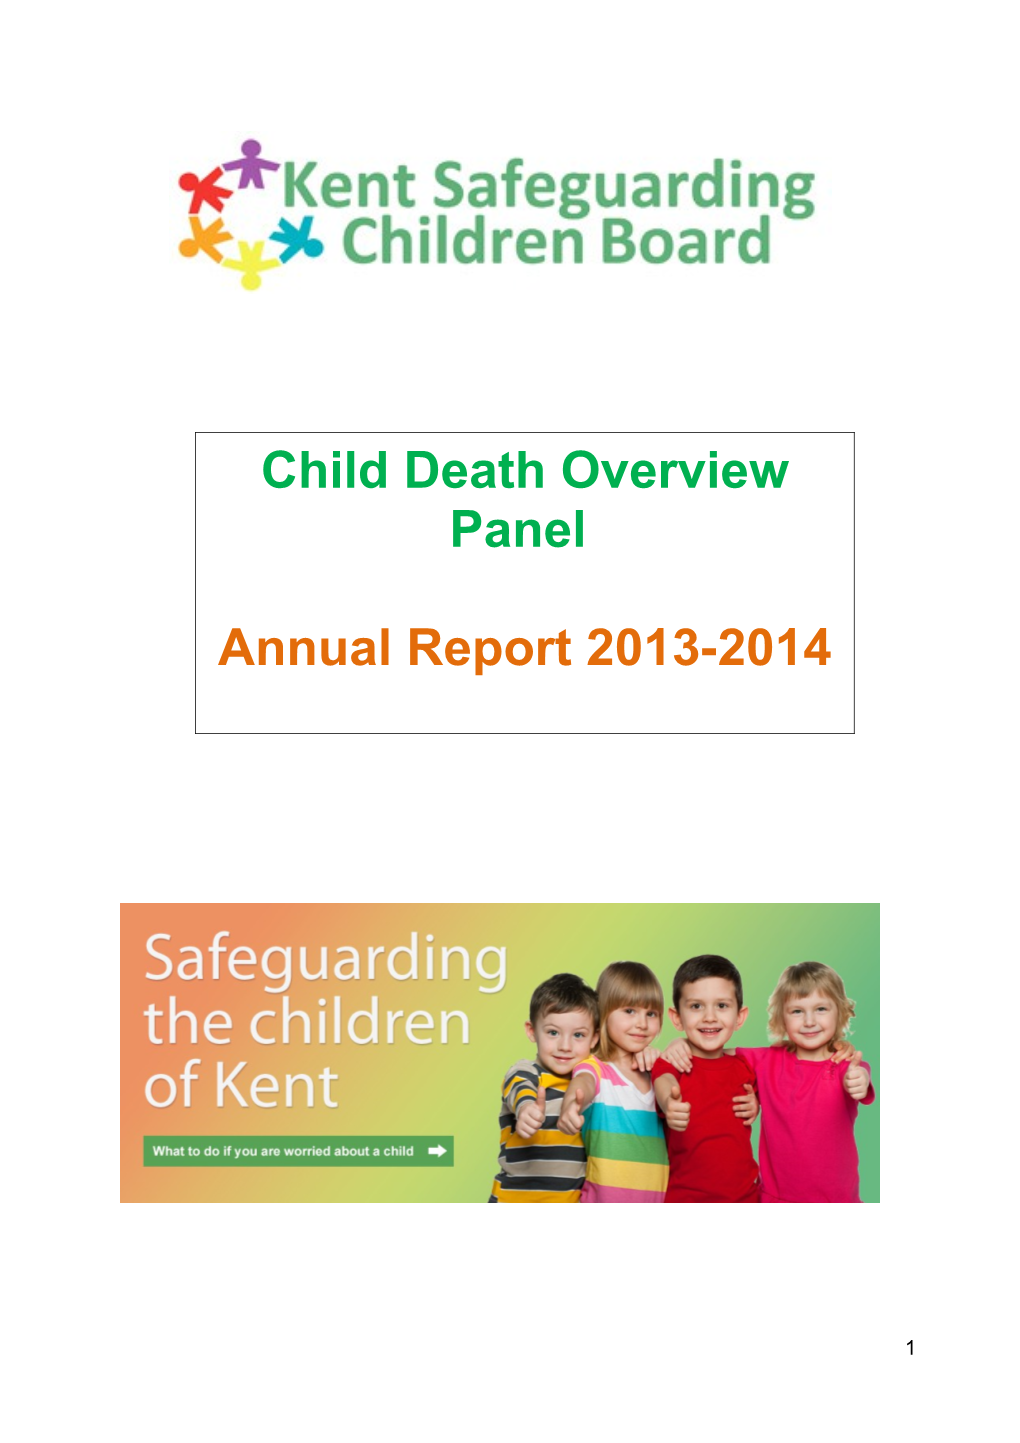 Chair of the Child Death Overview Panel